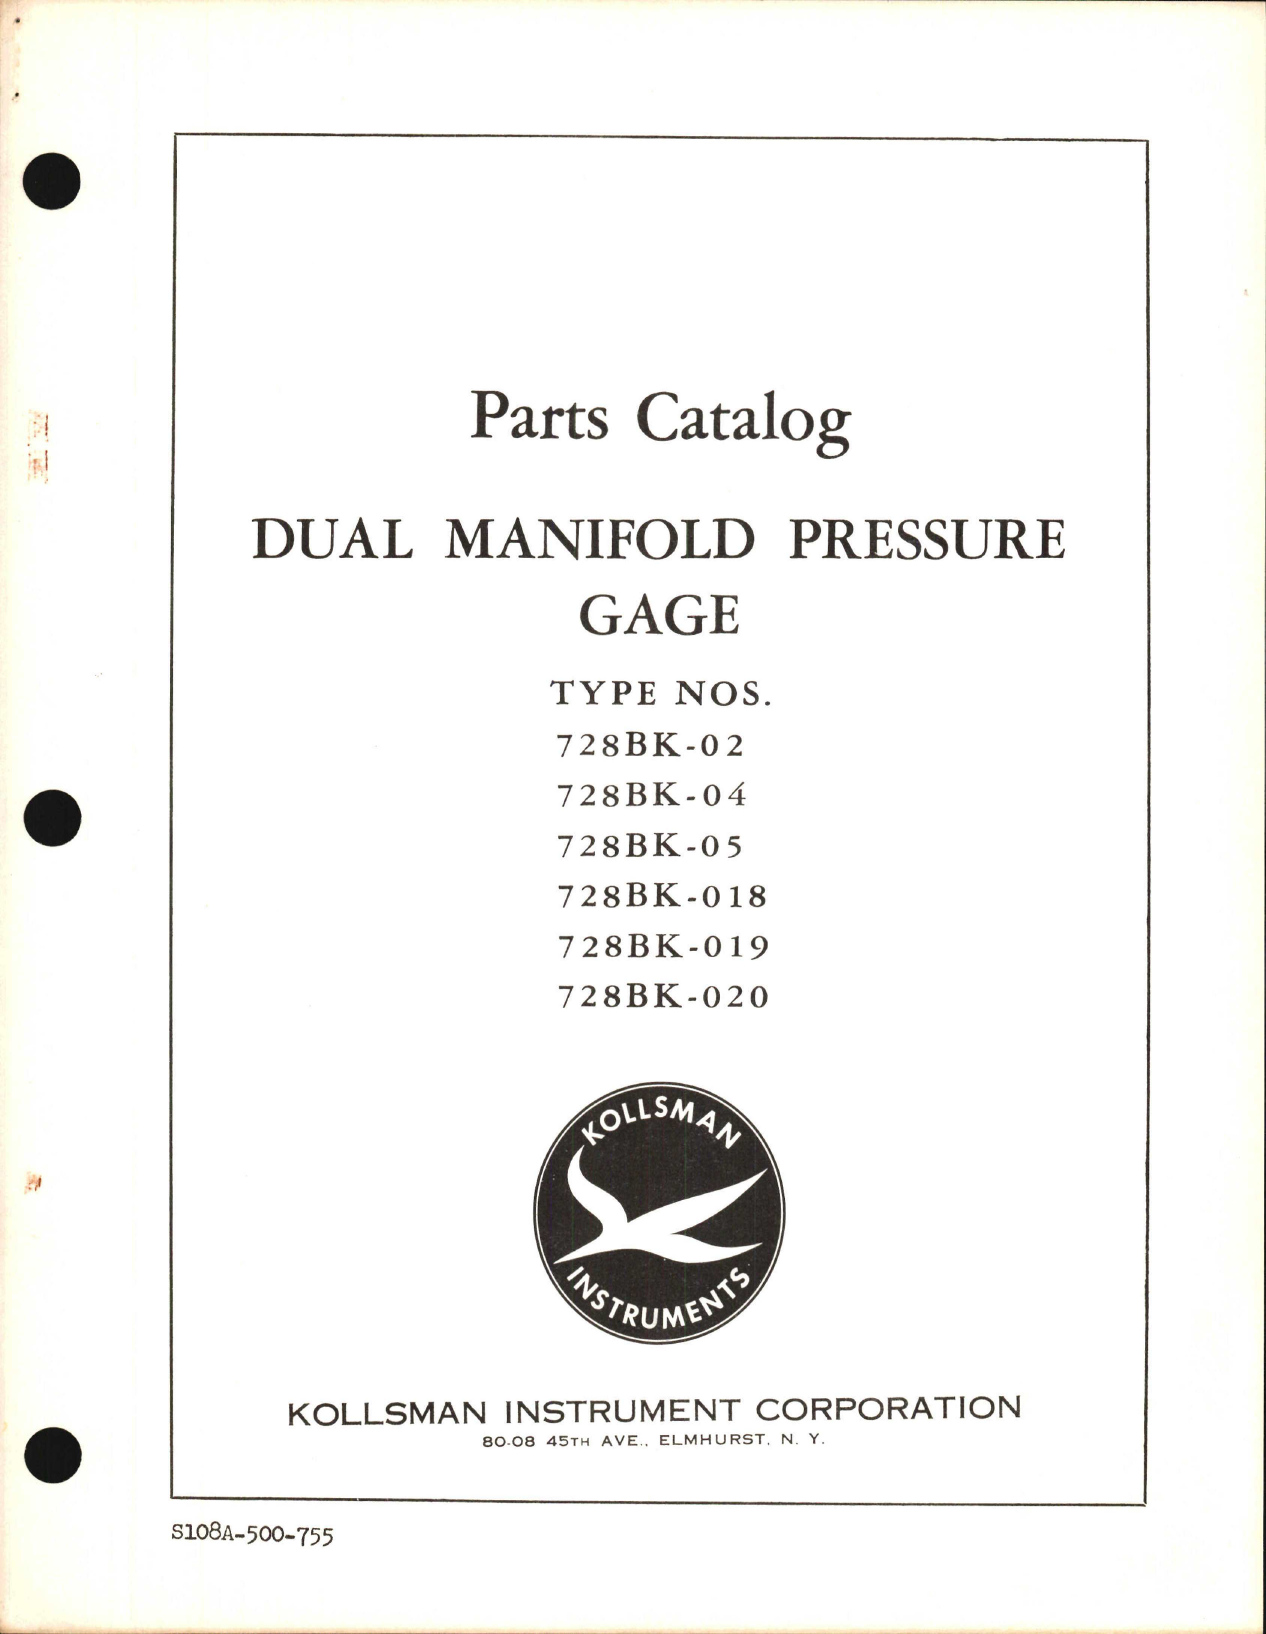 Sample page 1 from AirCorps Library document: Parts Catalog for Kollsman Dual Manifold Pressure Gage 728BK